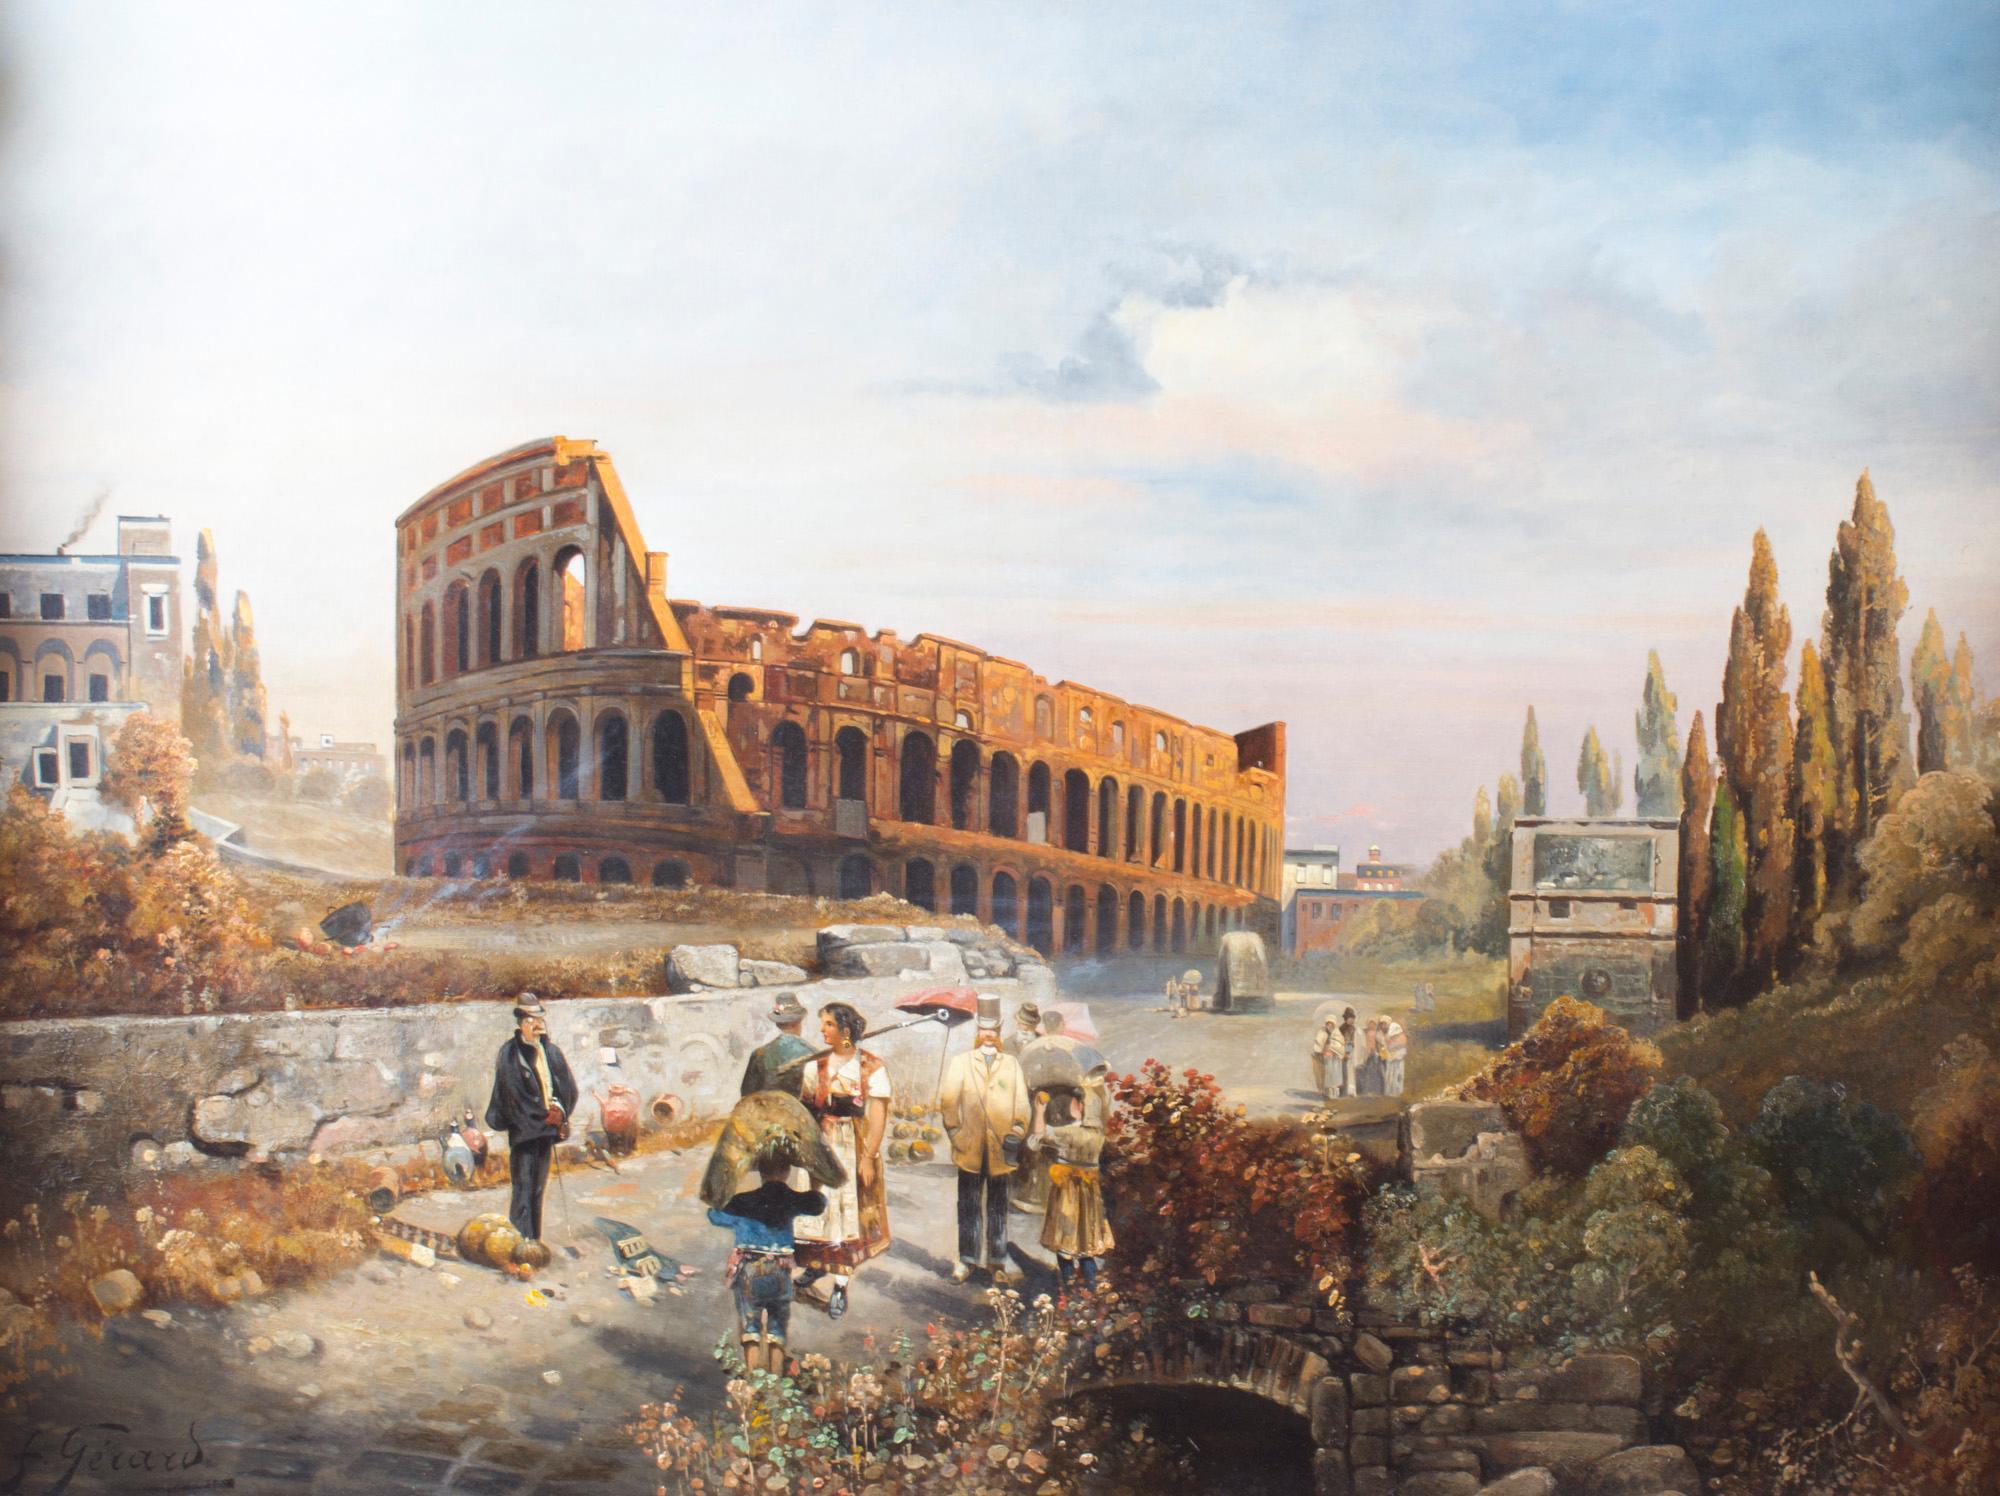 This is a beautiful oil on canvas painting of the Colosseum in the centre of Rome by the renowned French artist François Gérard (1770 - 1837) and signed lower left.

This beautiful landscape captures a striking view of the Colosseum, also known as